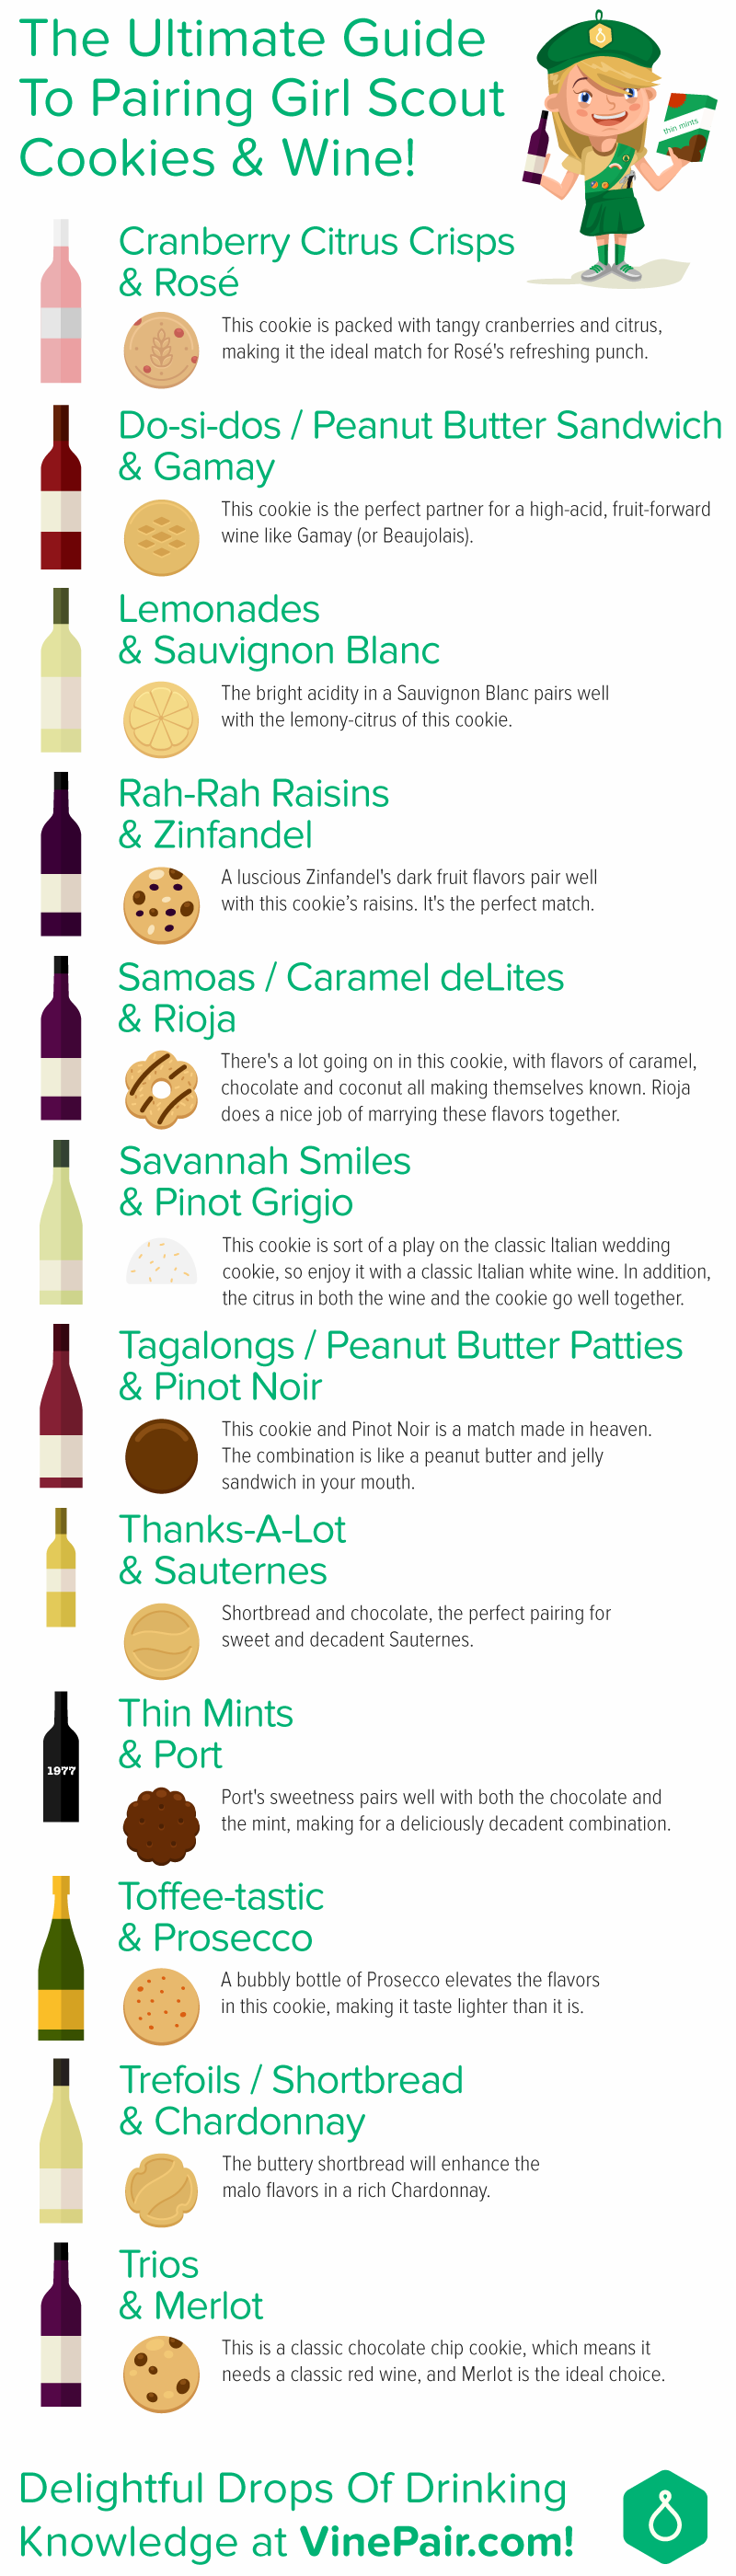 The Ultimate Guide To Pairing Girl Scout Cookies & Wine [INFOGRAPHIC]